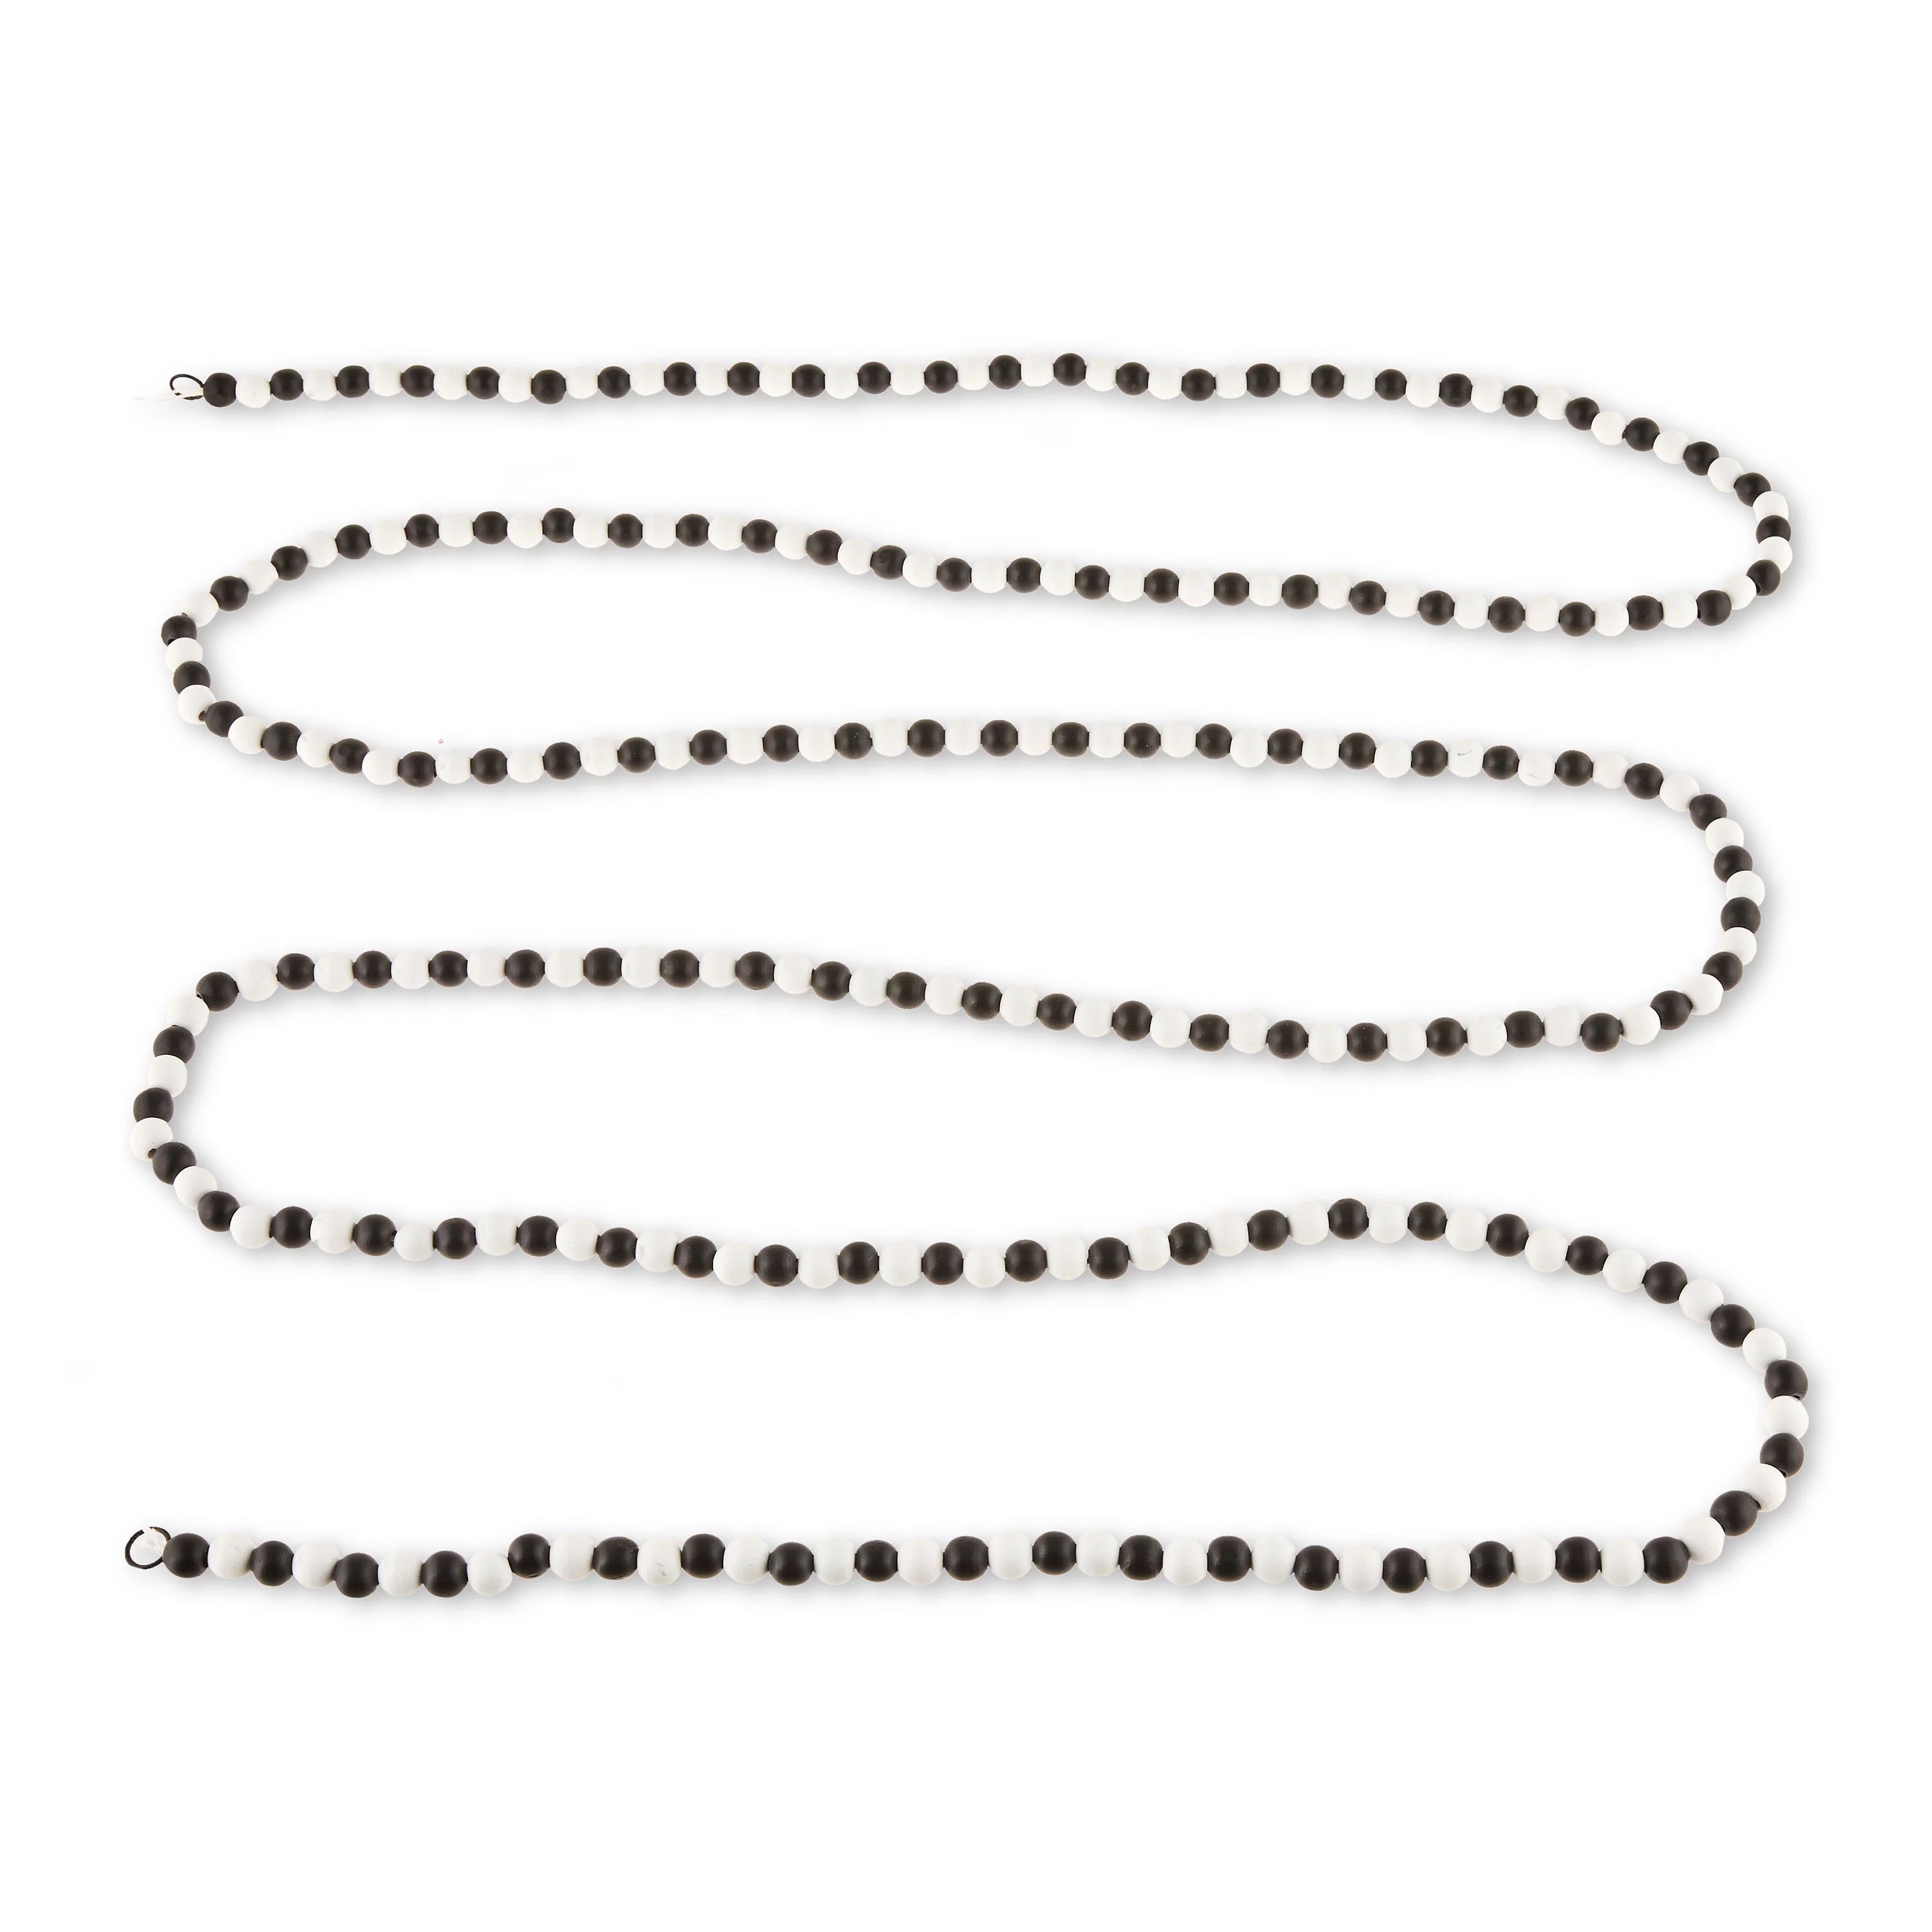 Black & White Wooden Bead Christmas Garland, 12', by Holiday Time | Walmart (US)